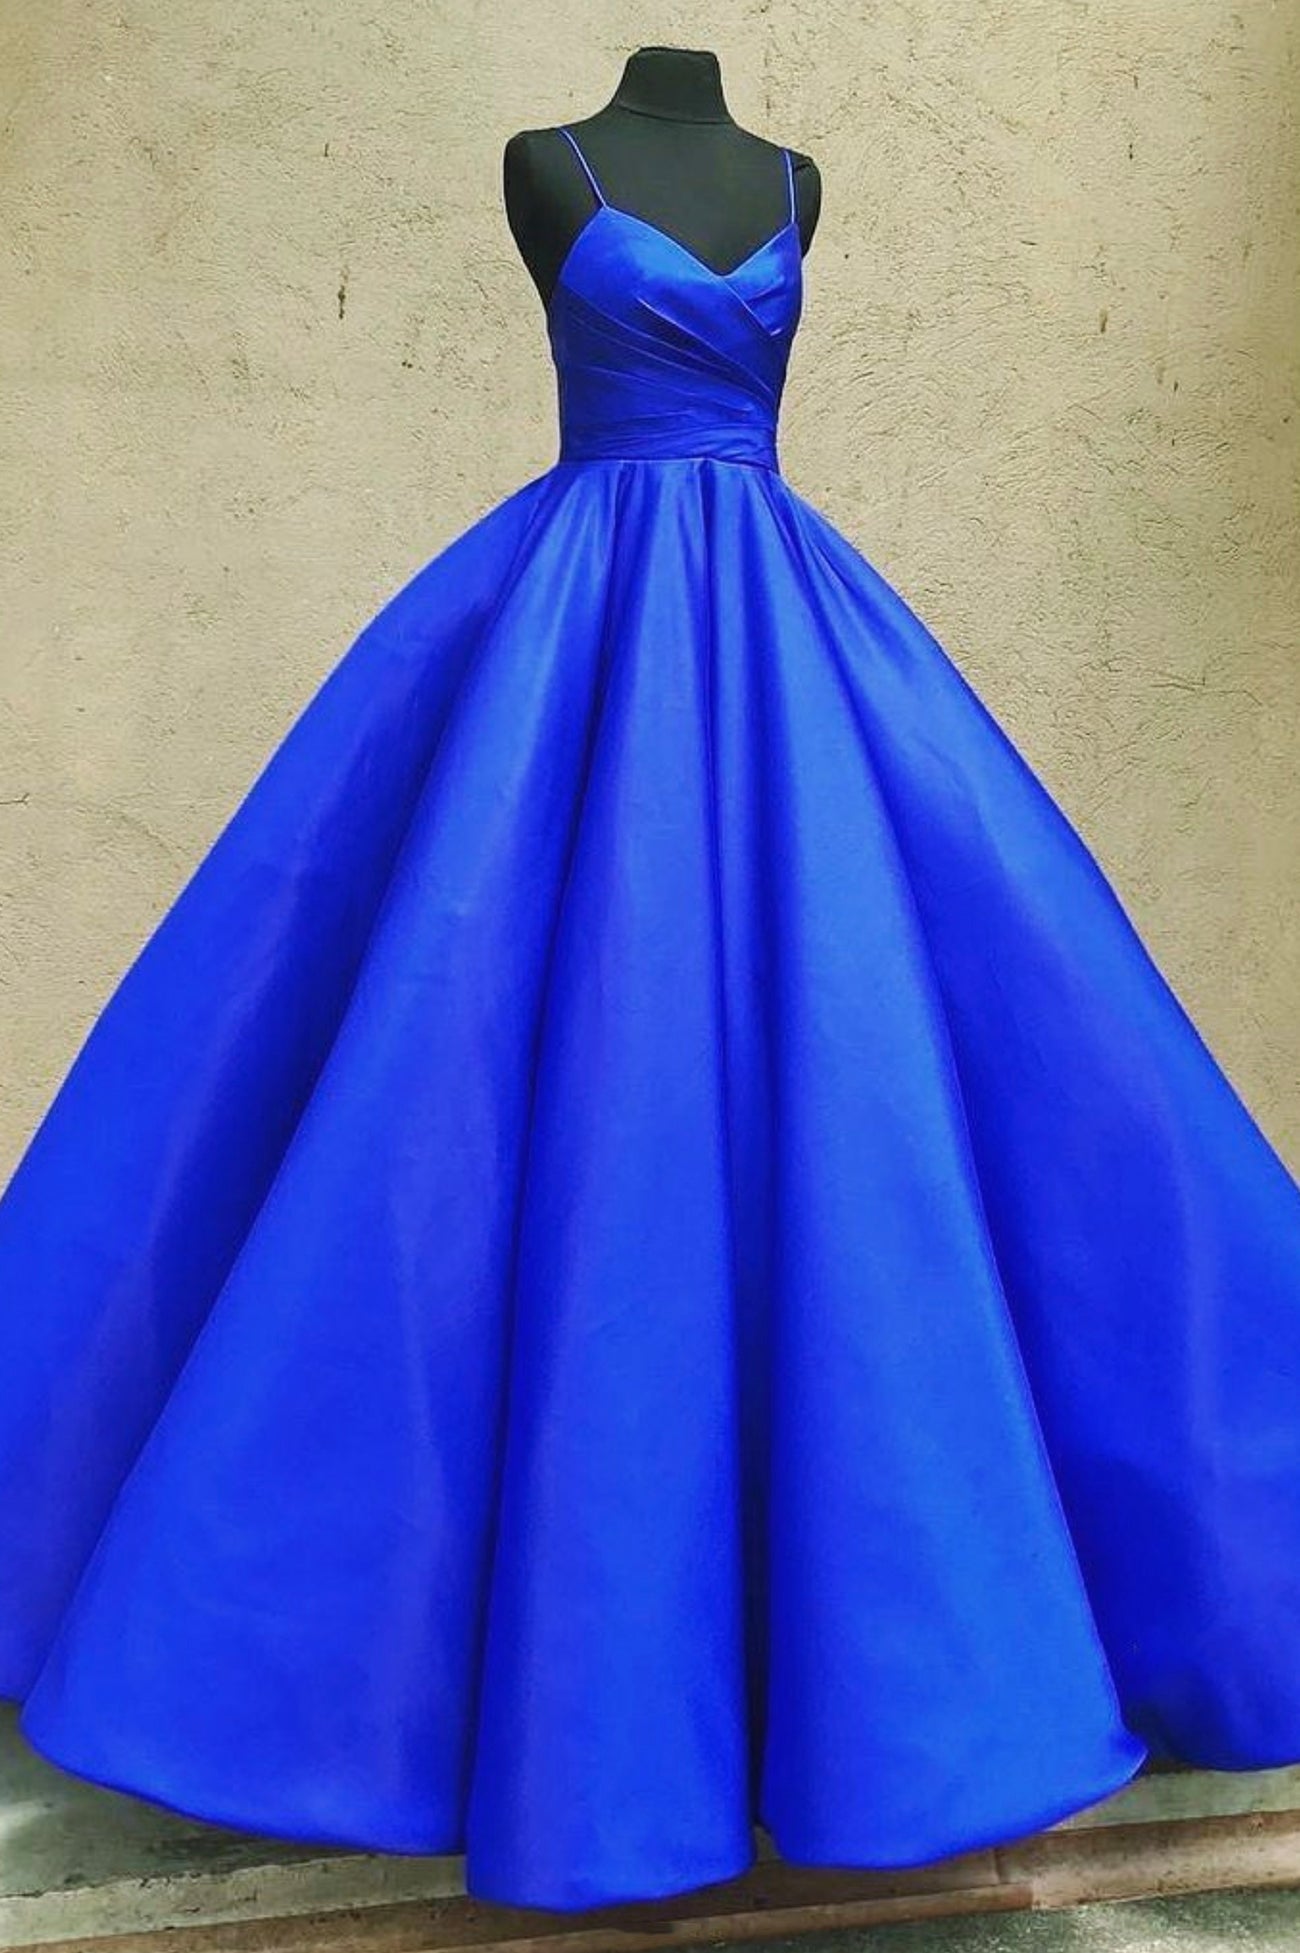 Prom Dressed Ball Gown, Blue Spaghetti Satin Long Formal Dress, A-Line Evening Party Gown